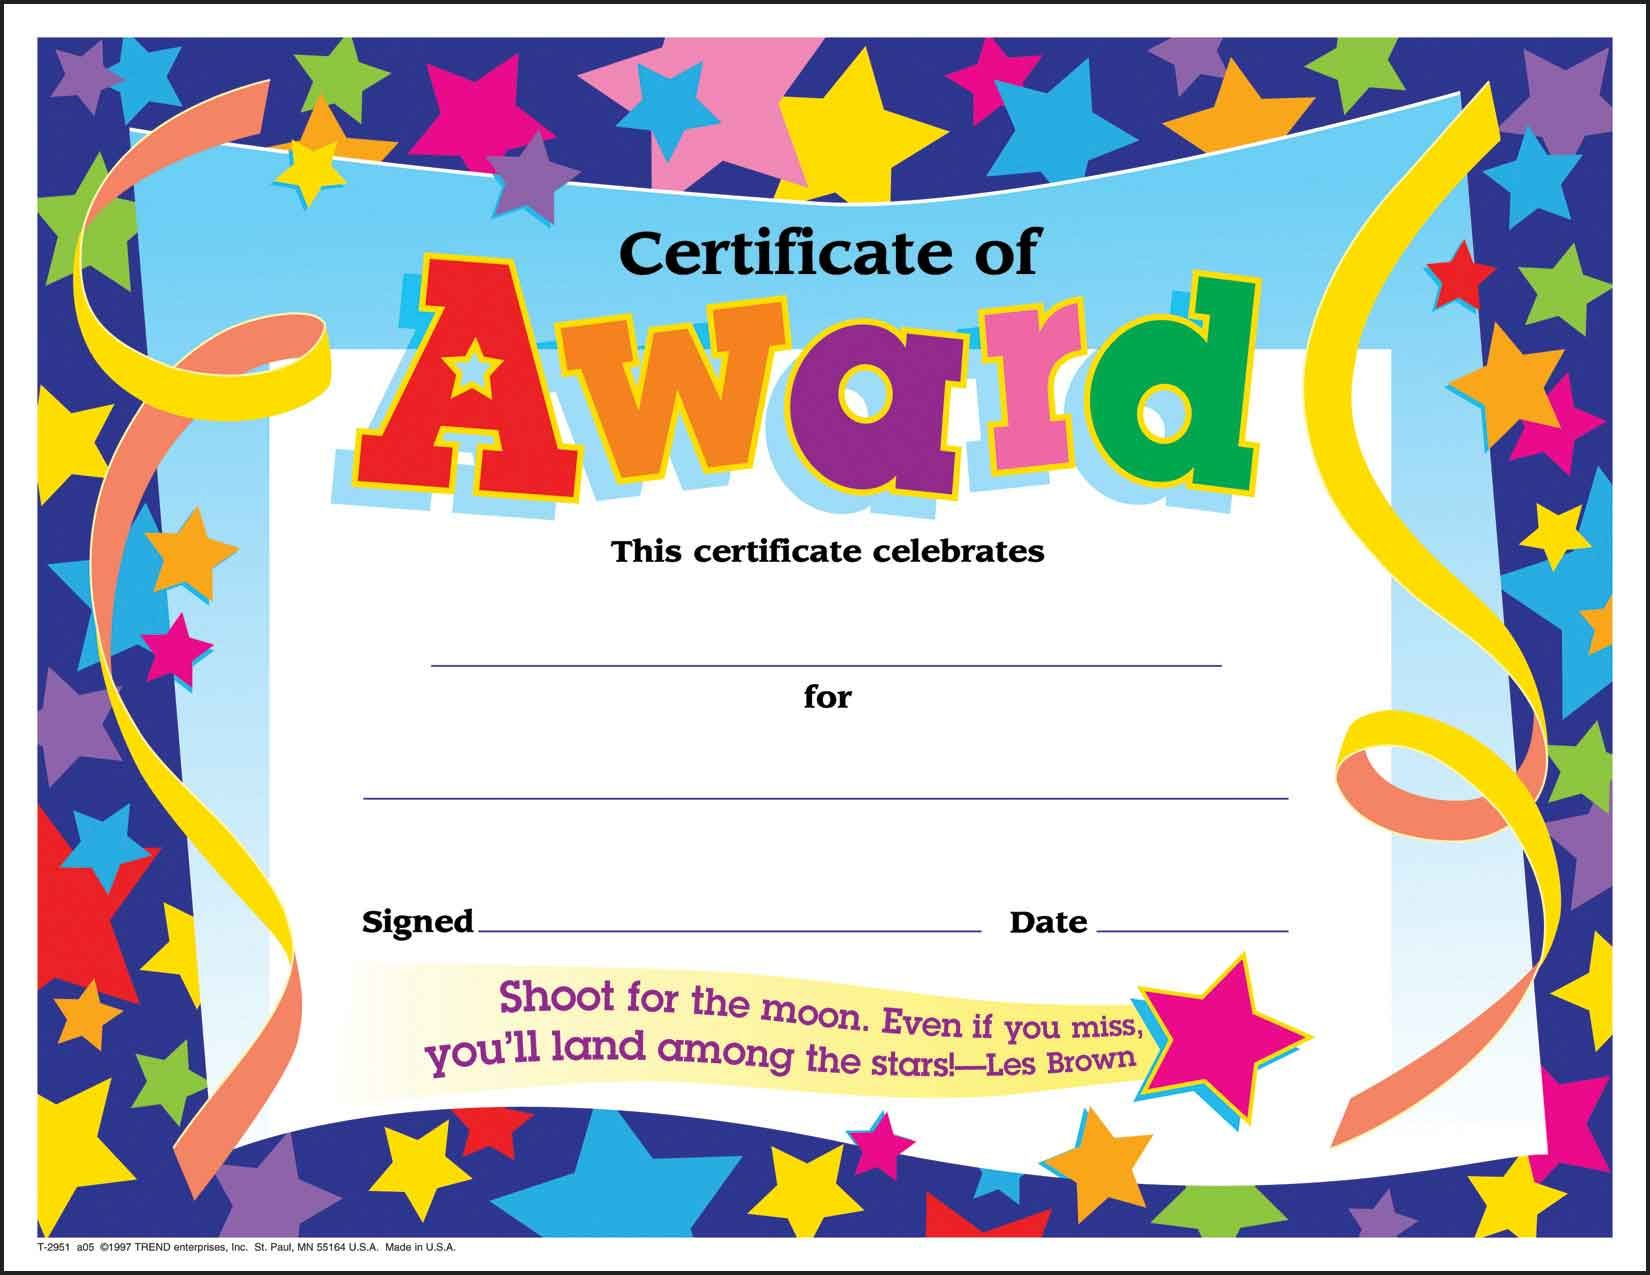 Certificate Template For Kids Free Certificate Templates - Free Printable School Certificates Templates